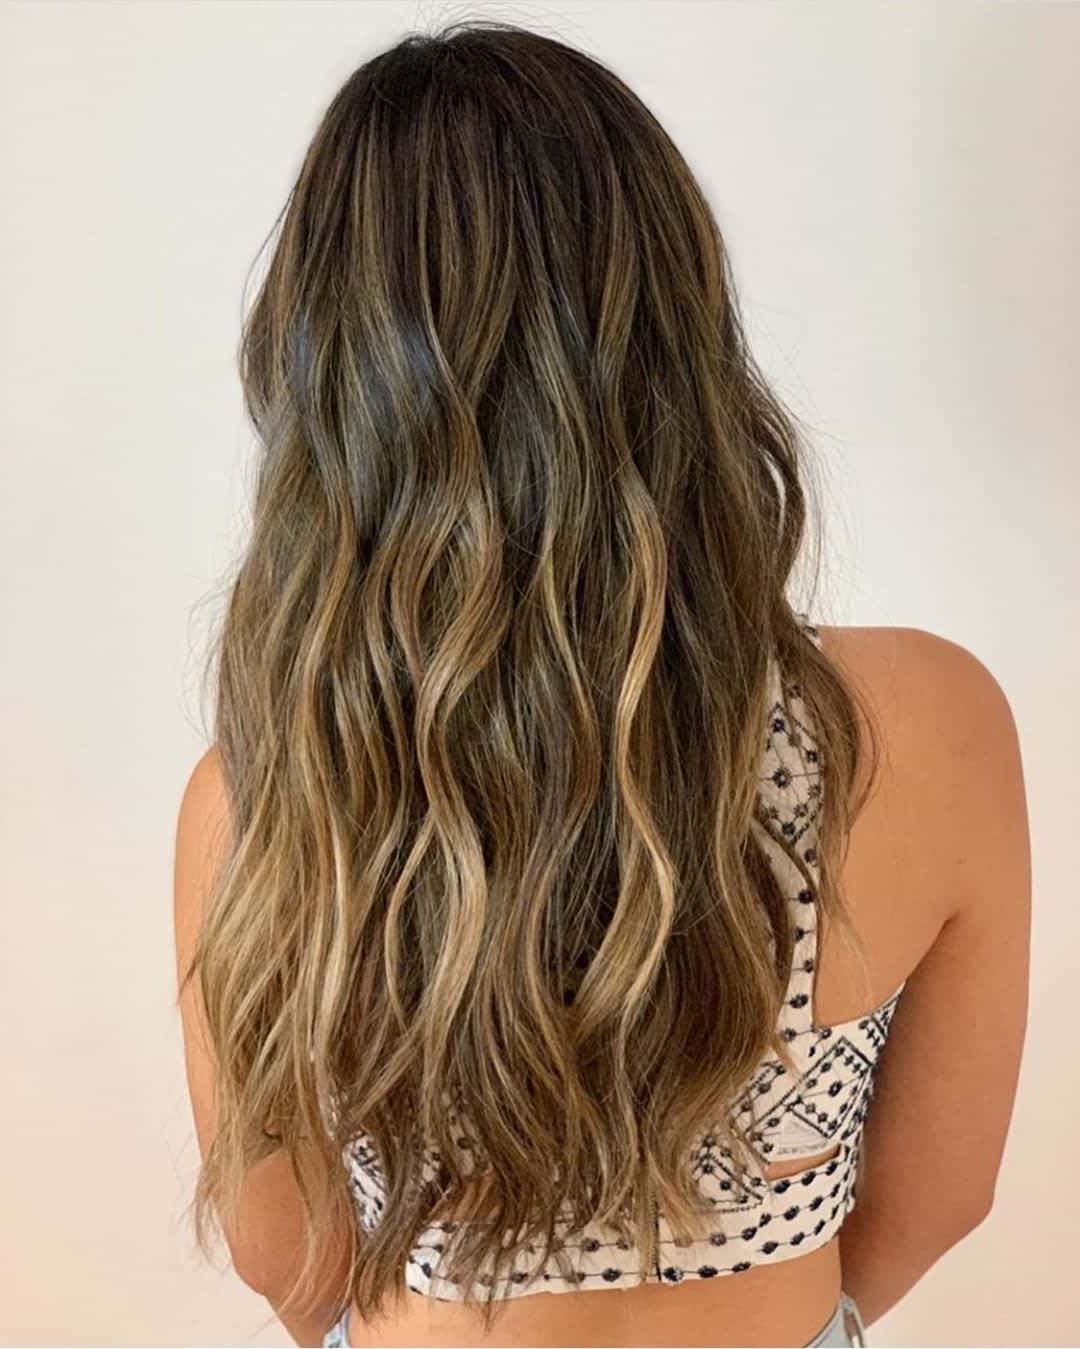 10 Best Beach Wave Hair And Balayage Ideas With Icy Charm! – Hairstyles  Weekly For Famous Beachy Waves With Ombre (Gallery 7 of 18)